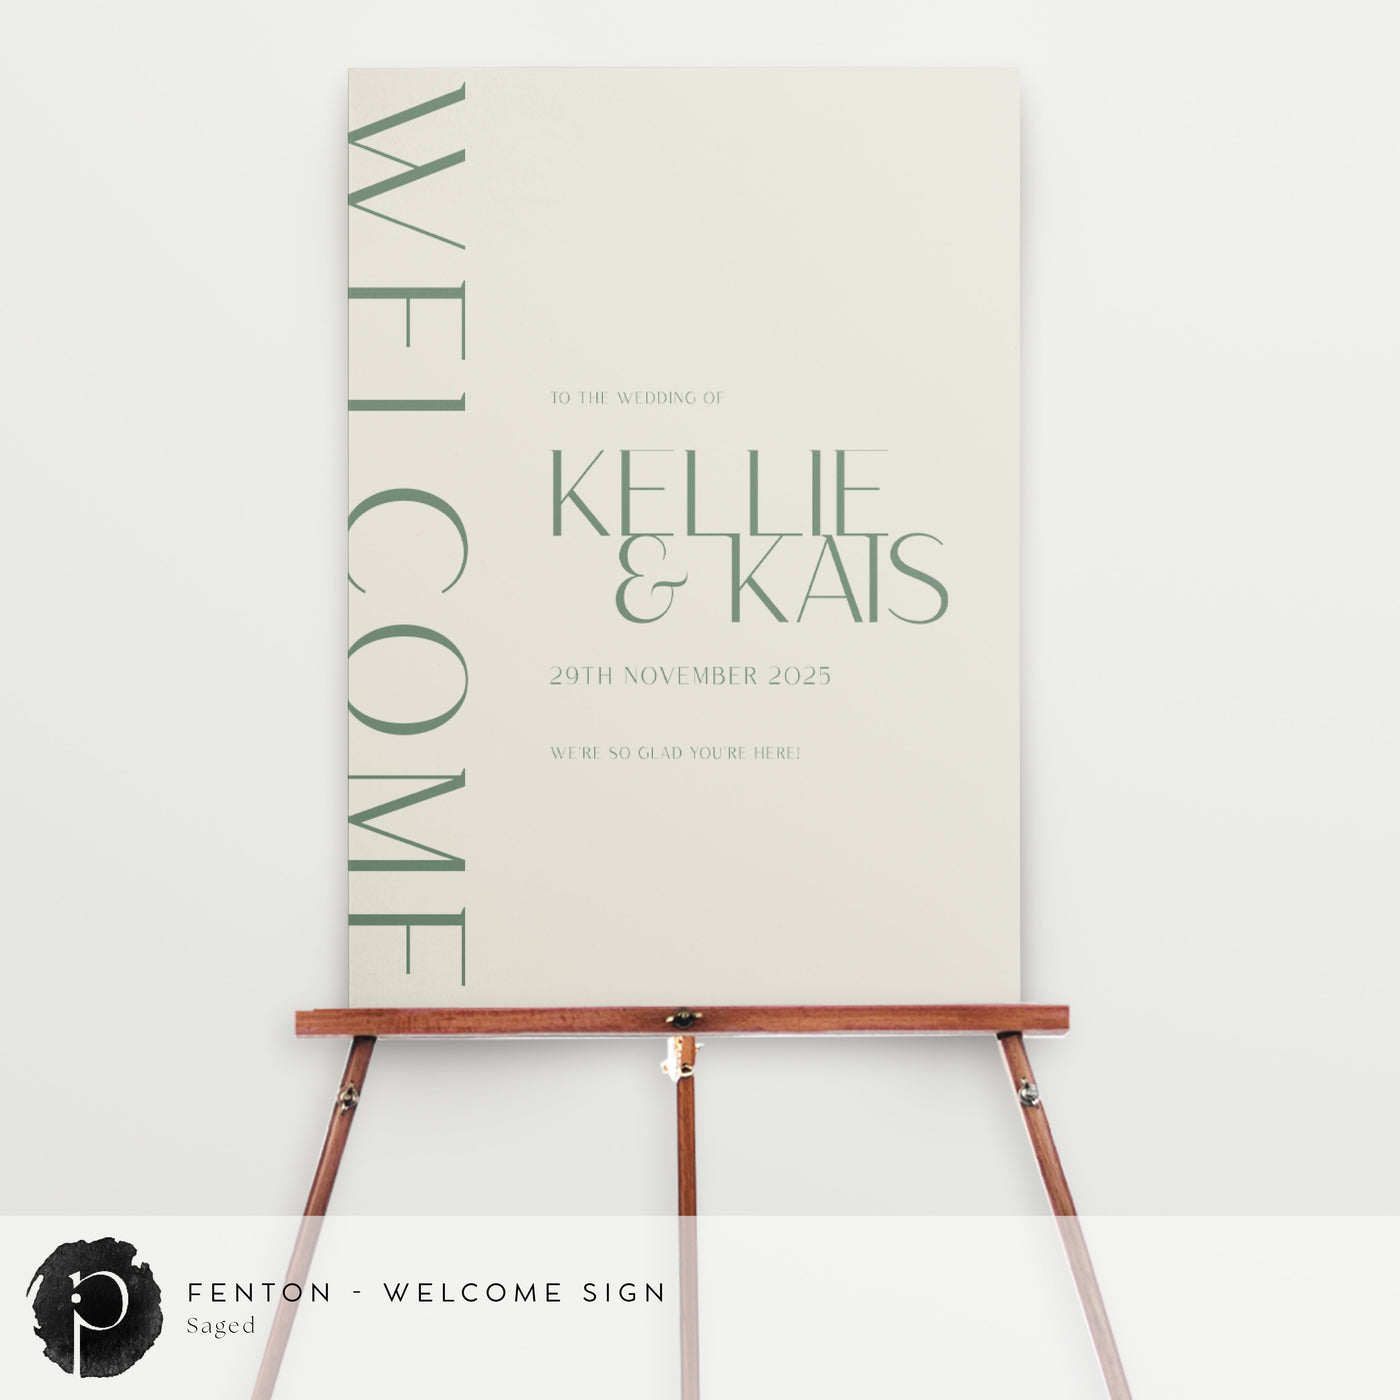 Fenton - Welcome Sign